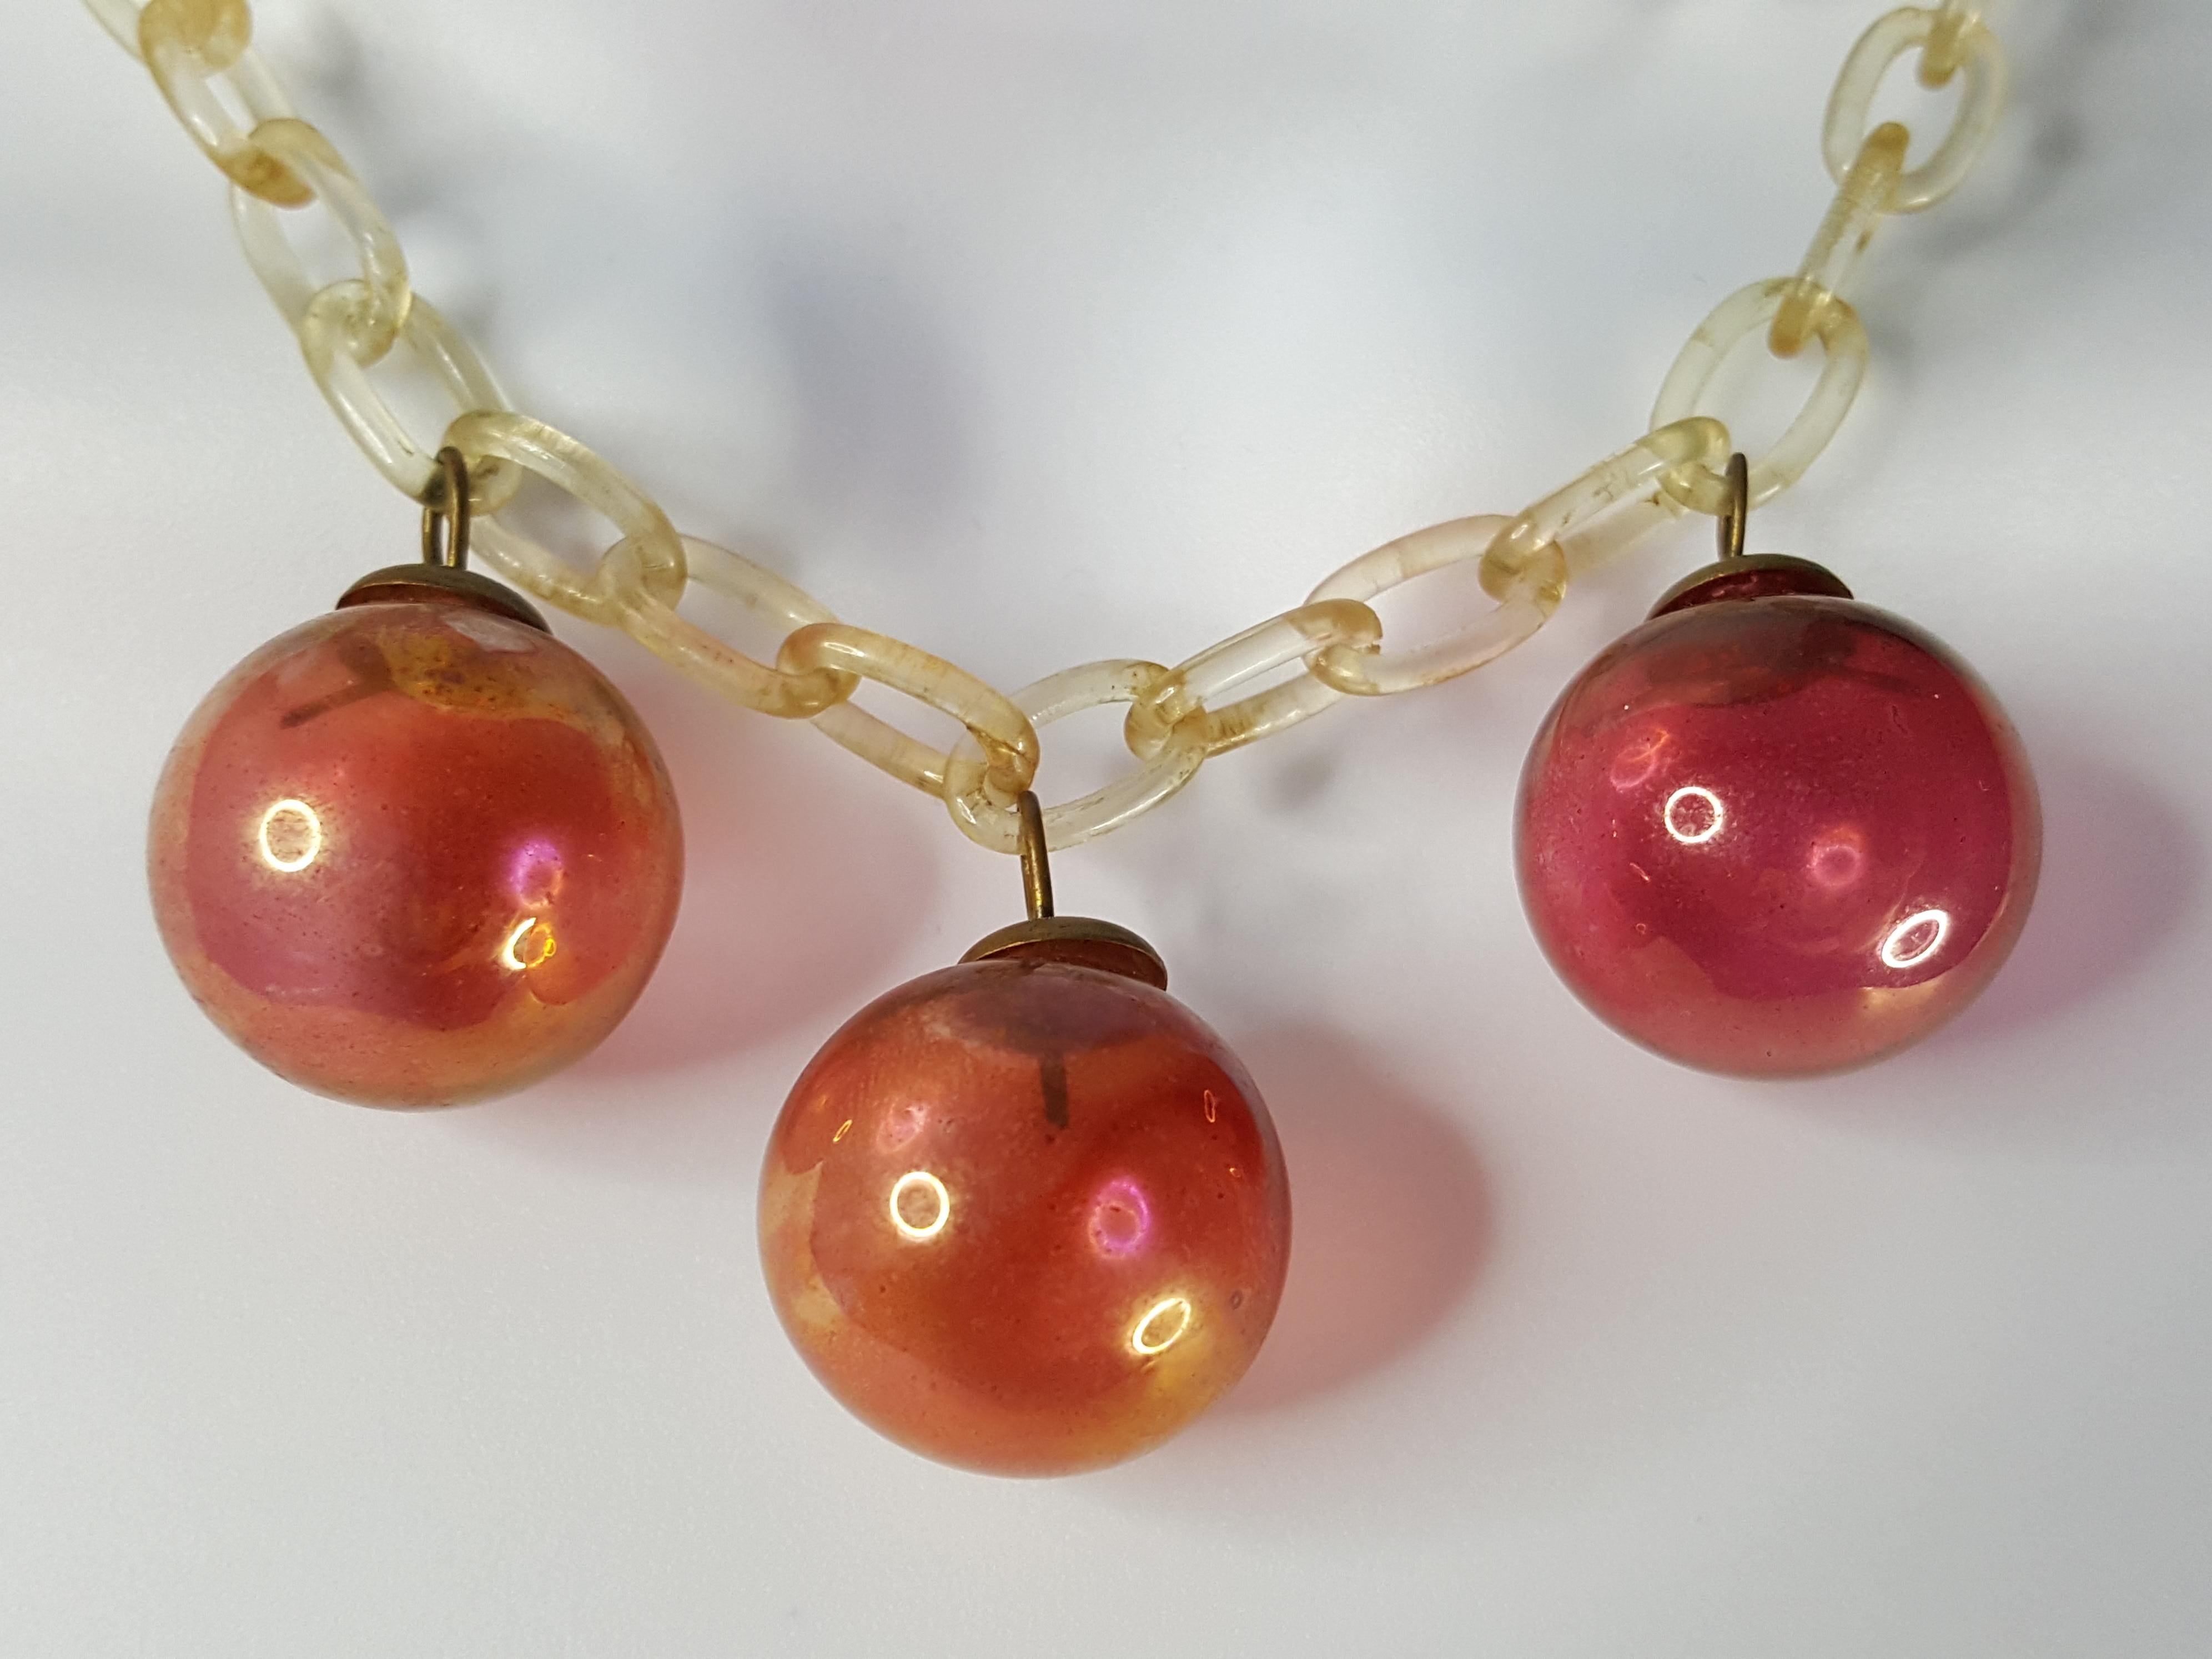 Antique RareVenetian ArchimedeSegusoStyle HandblownGlass Links Pendants Necklace In Excellent Condition For Sale In Chicago, IL